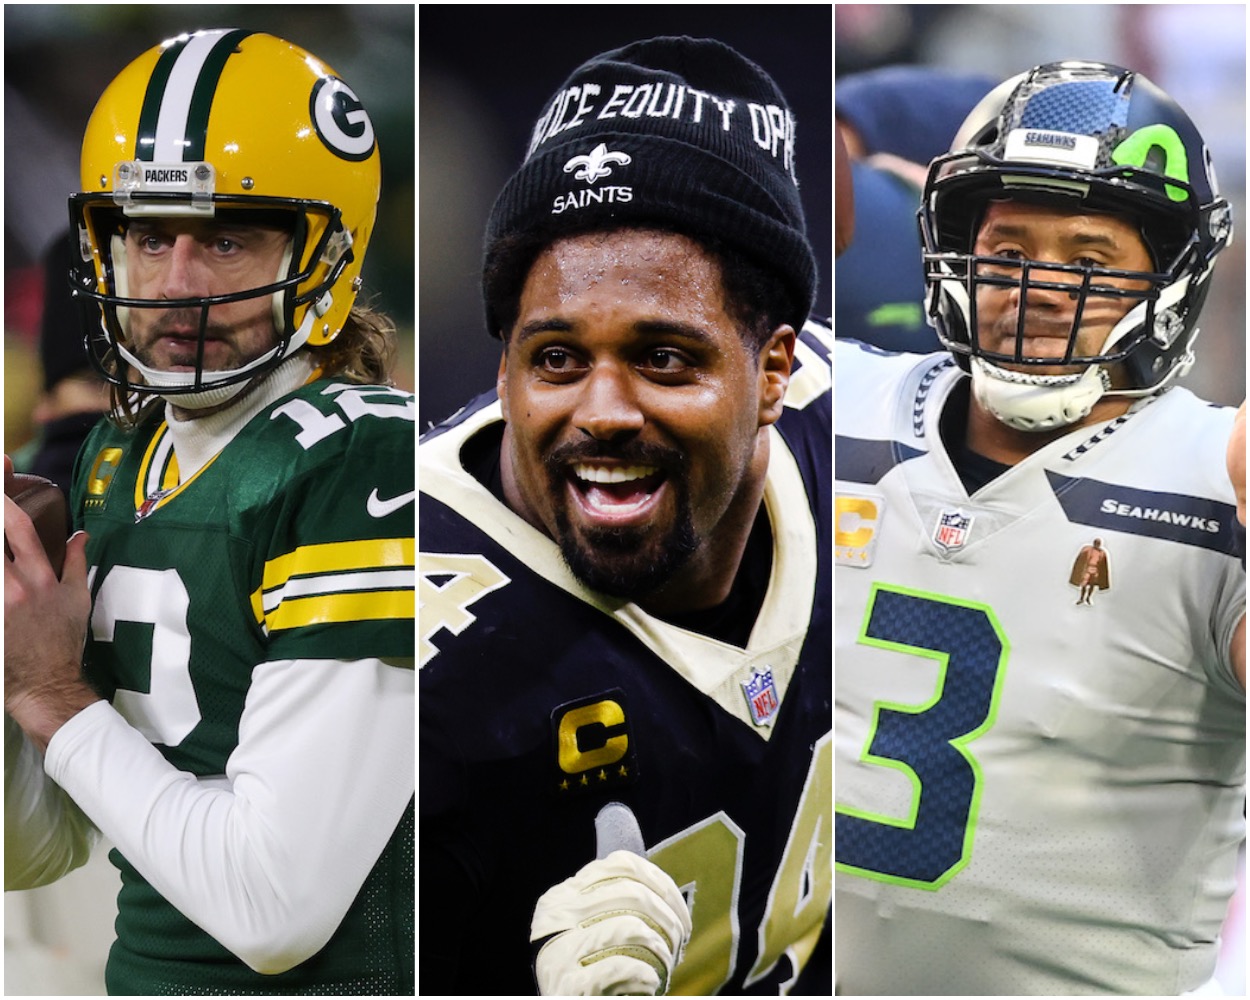 Saints DE Cameron Jordan Is Making a Premature Push for Aaron Rodgers, Russell Wilson: ‘I’m Recruiting Already’